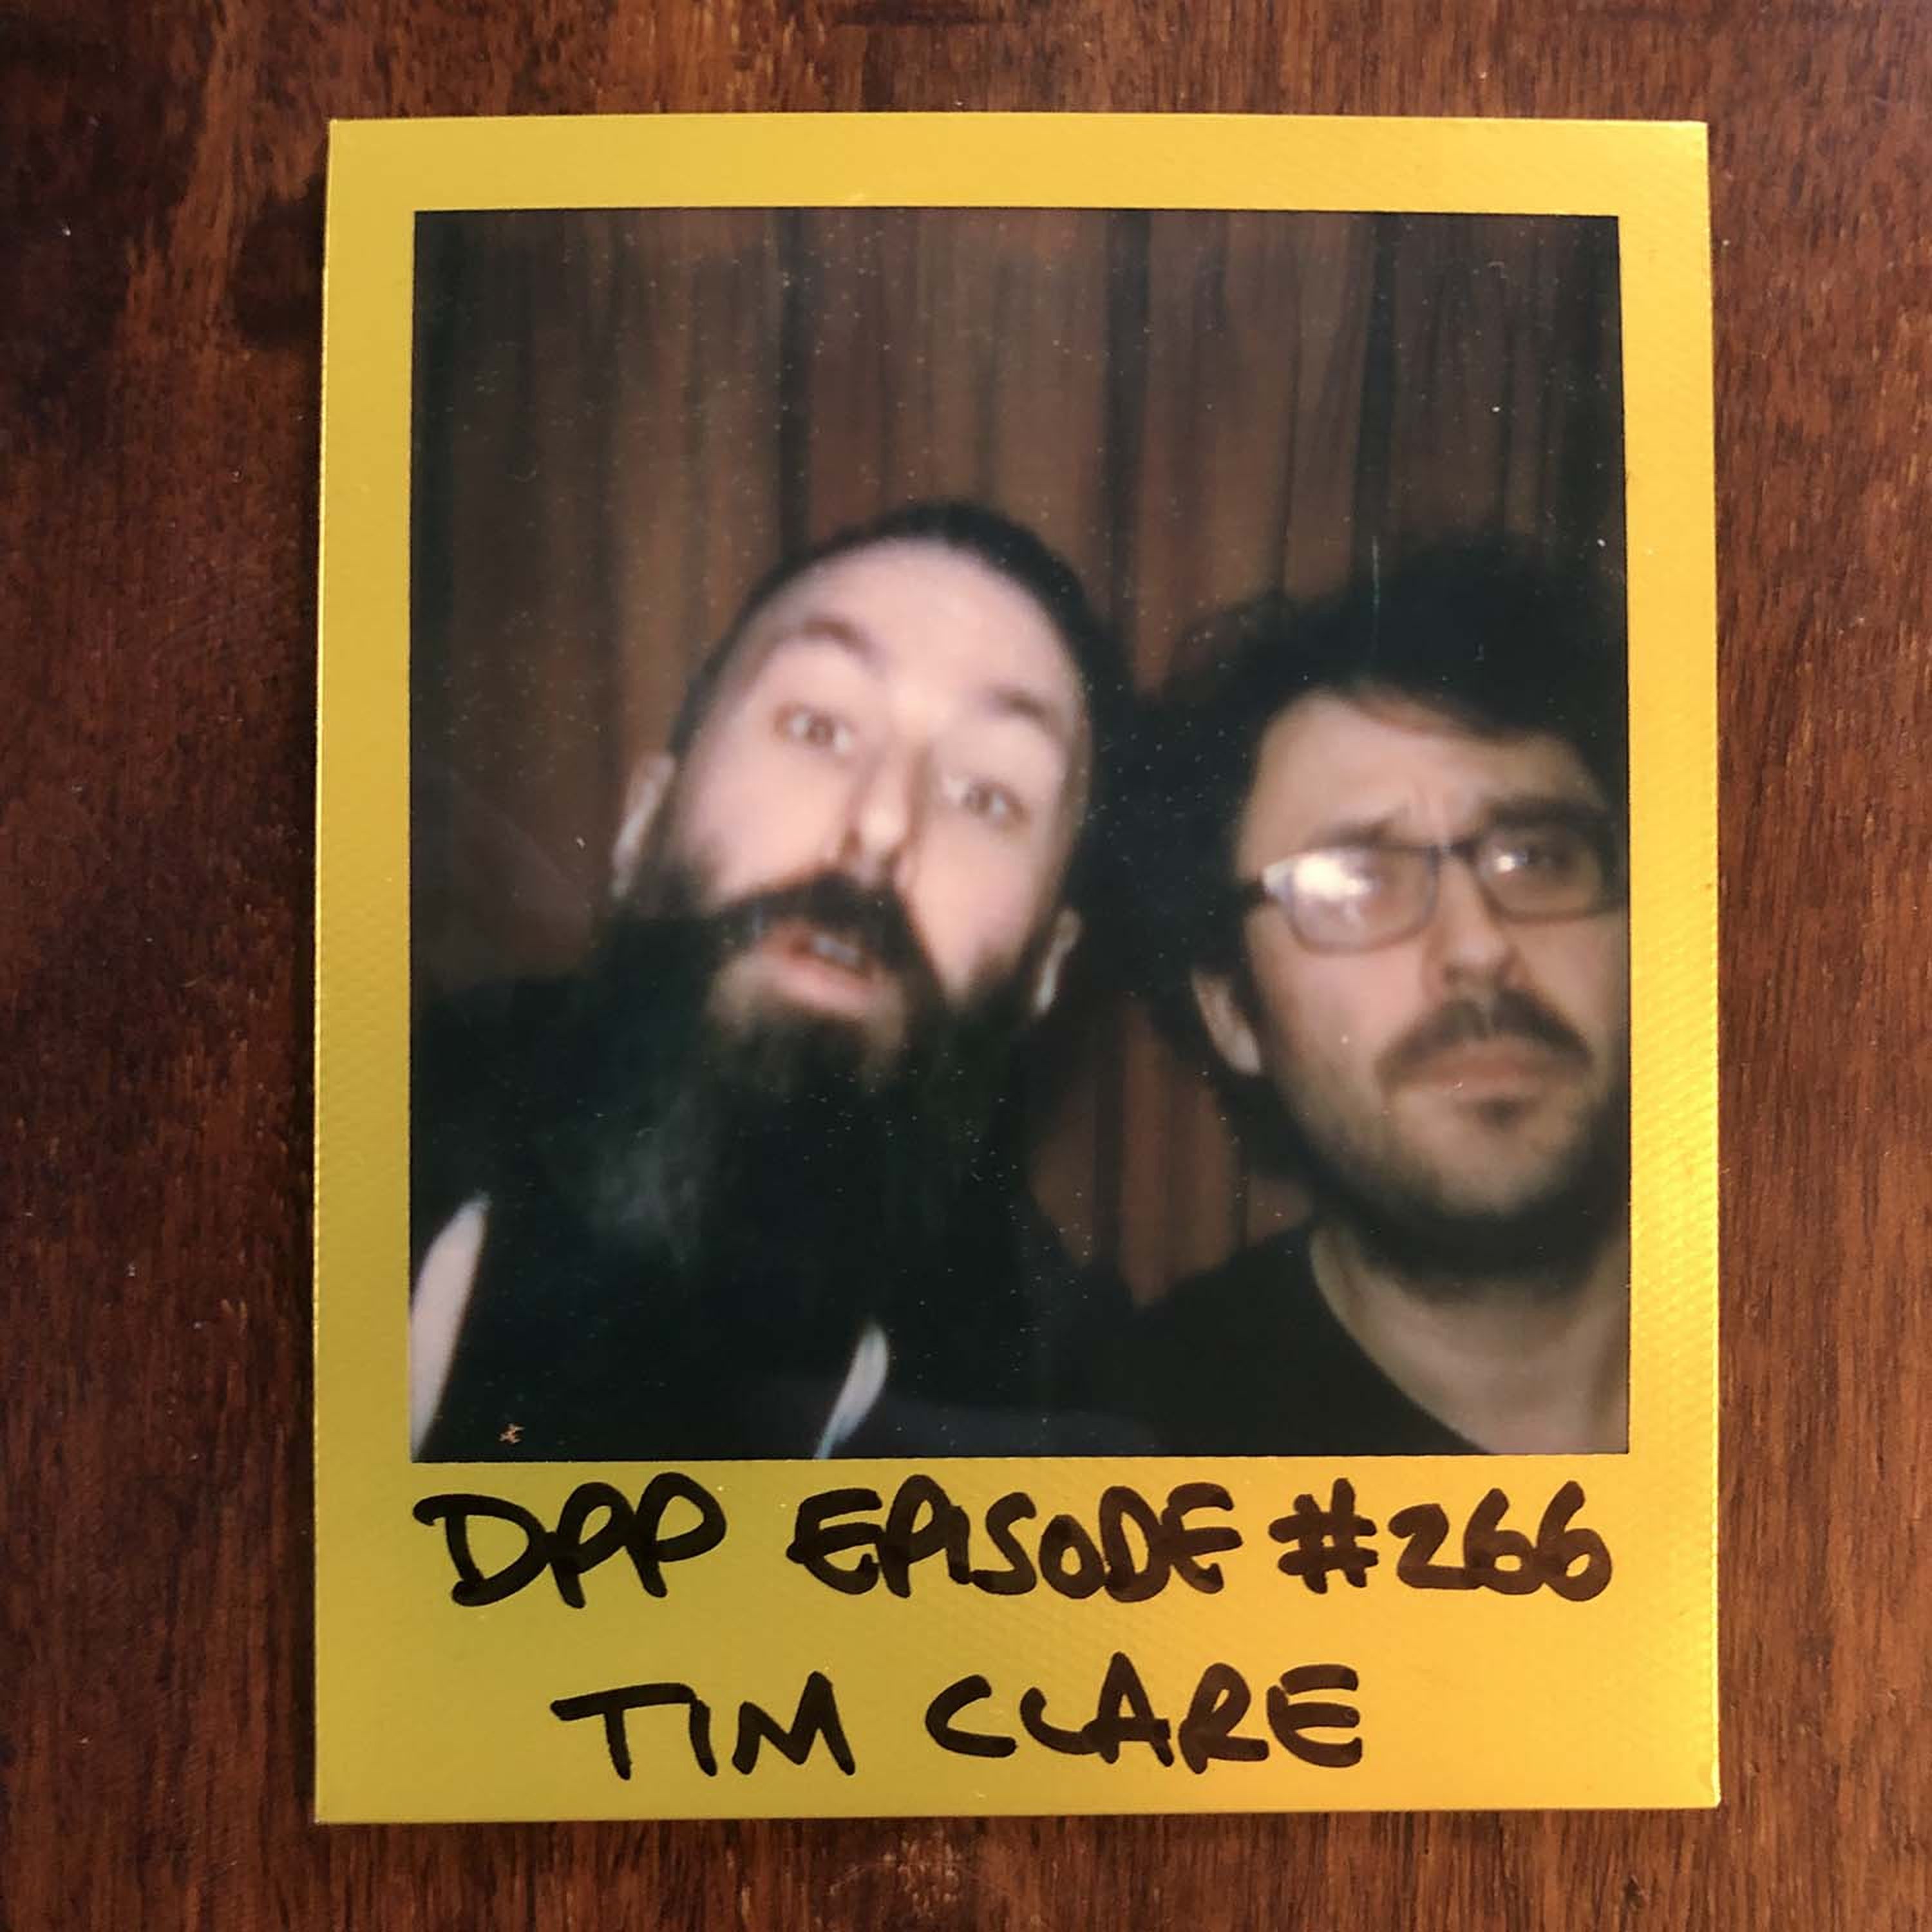 cover art for Tim Clare • Distraction Pieces Podcast with Scroobius Pip #266